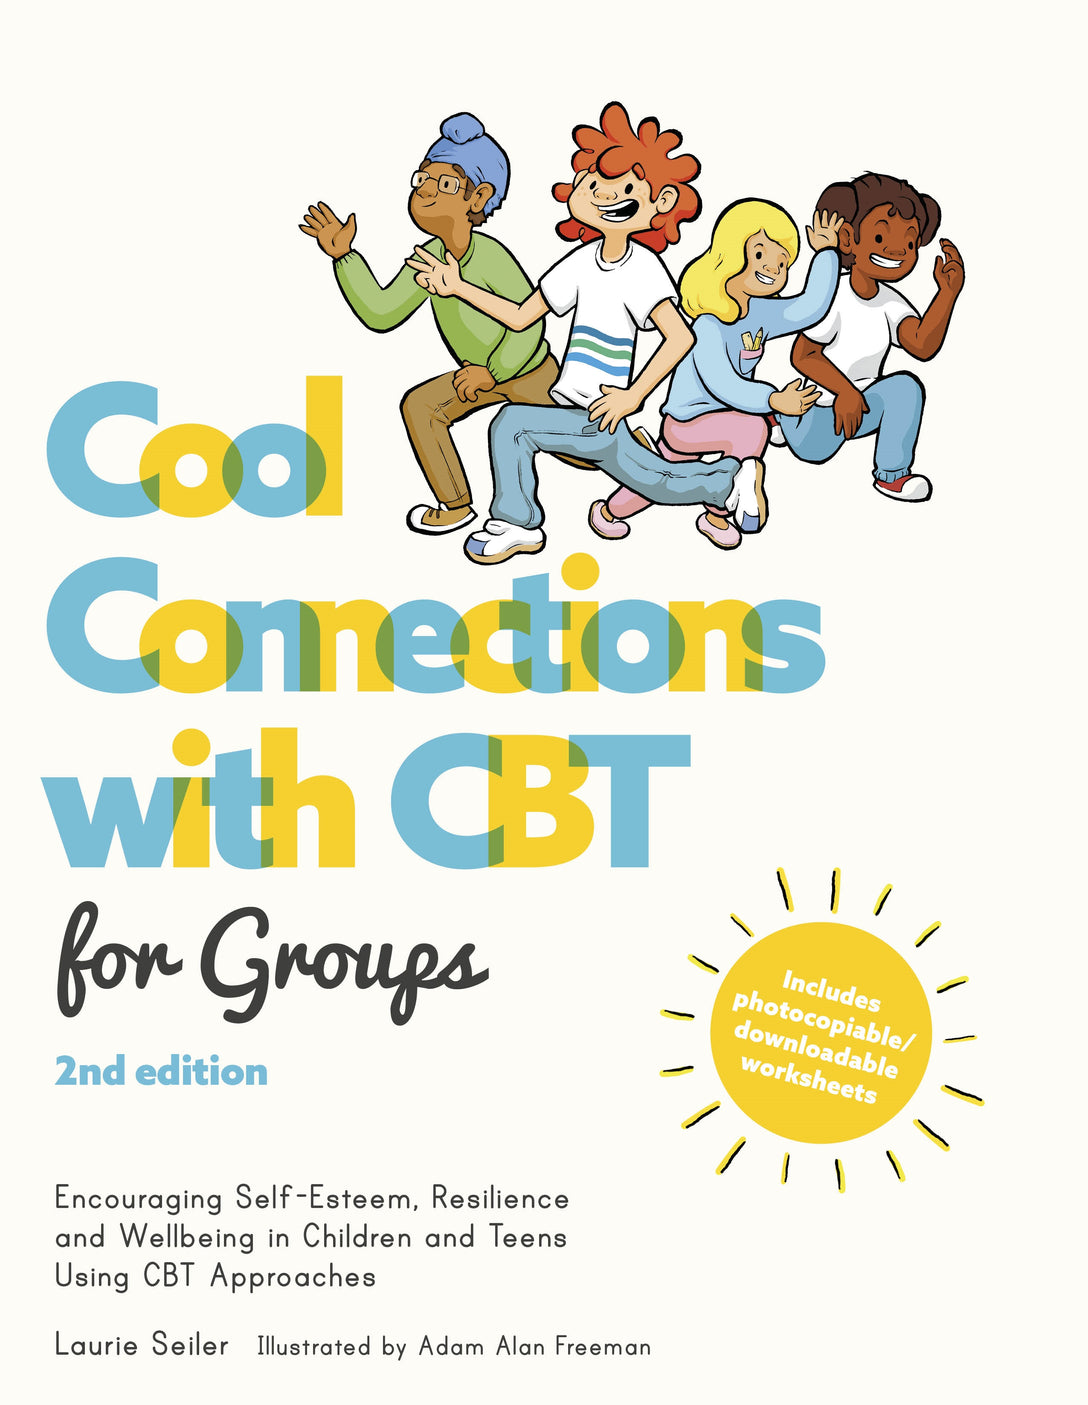 Cool Connections with CBT for Groups, 2nd edition by Laurie Seiler, Adam A. Freeman